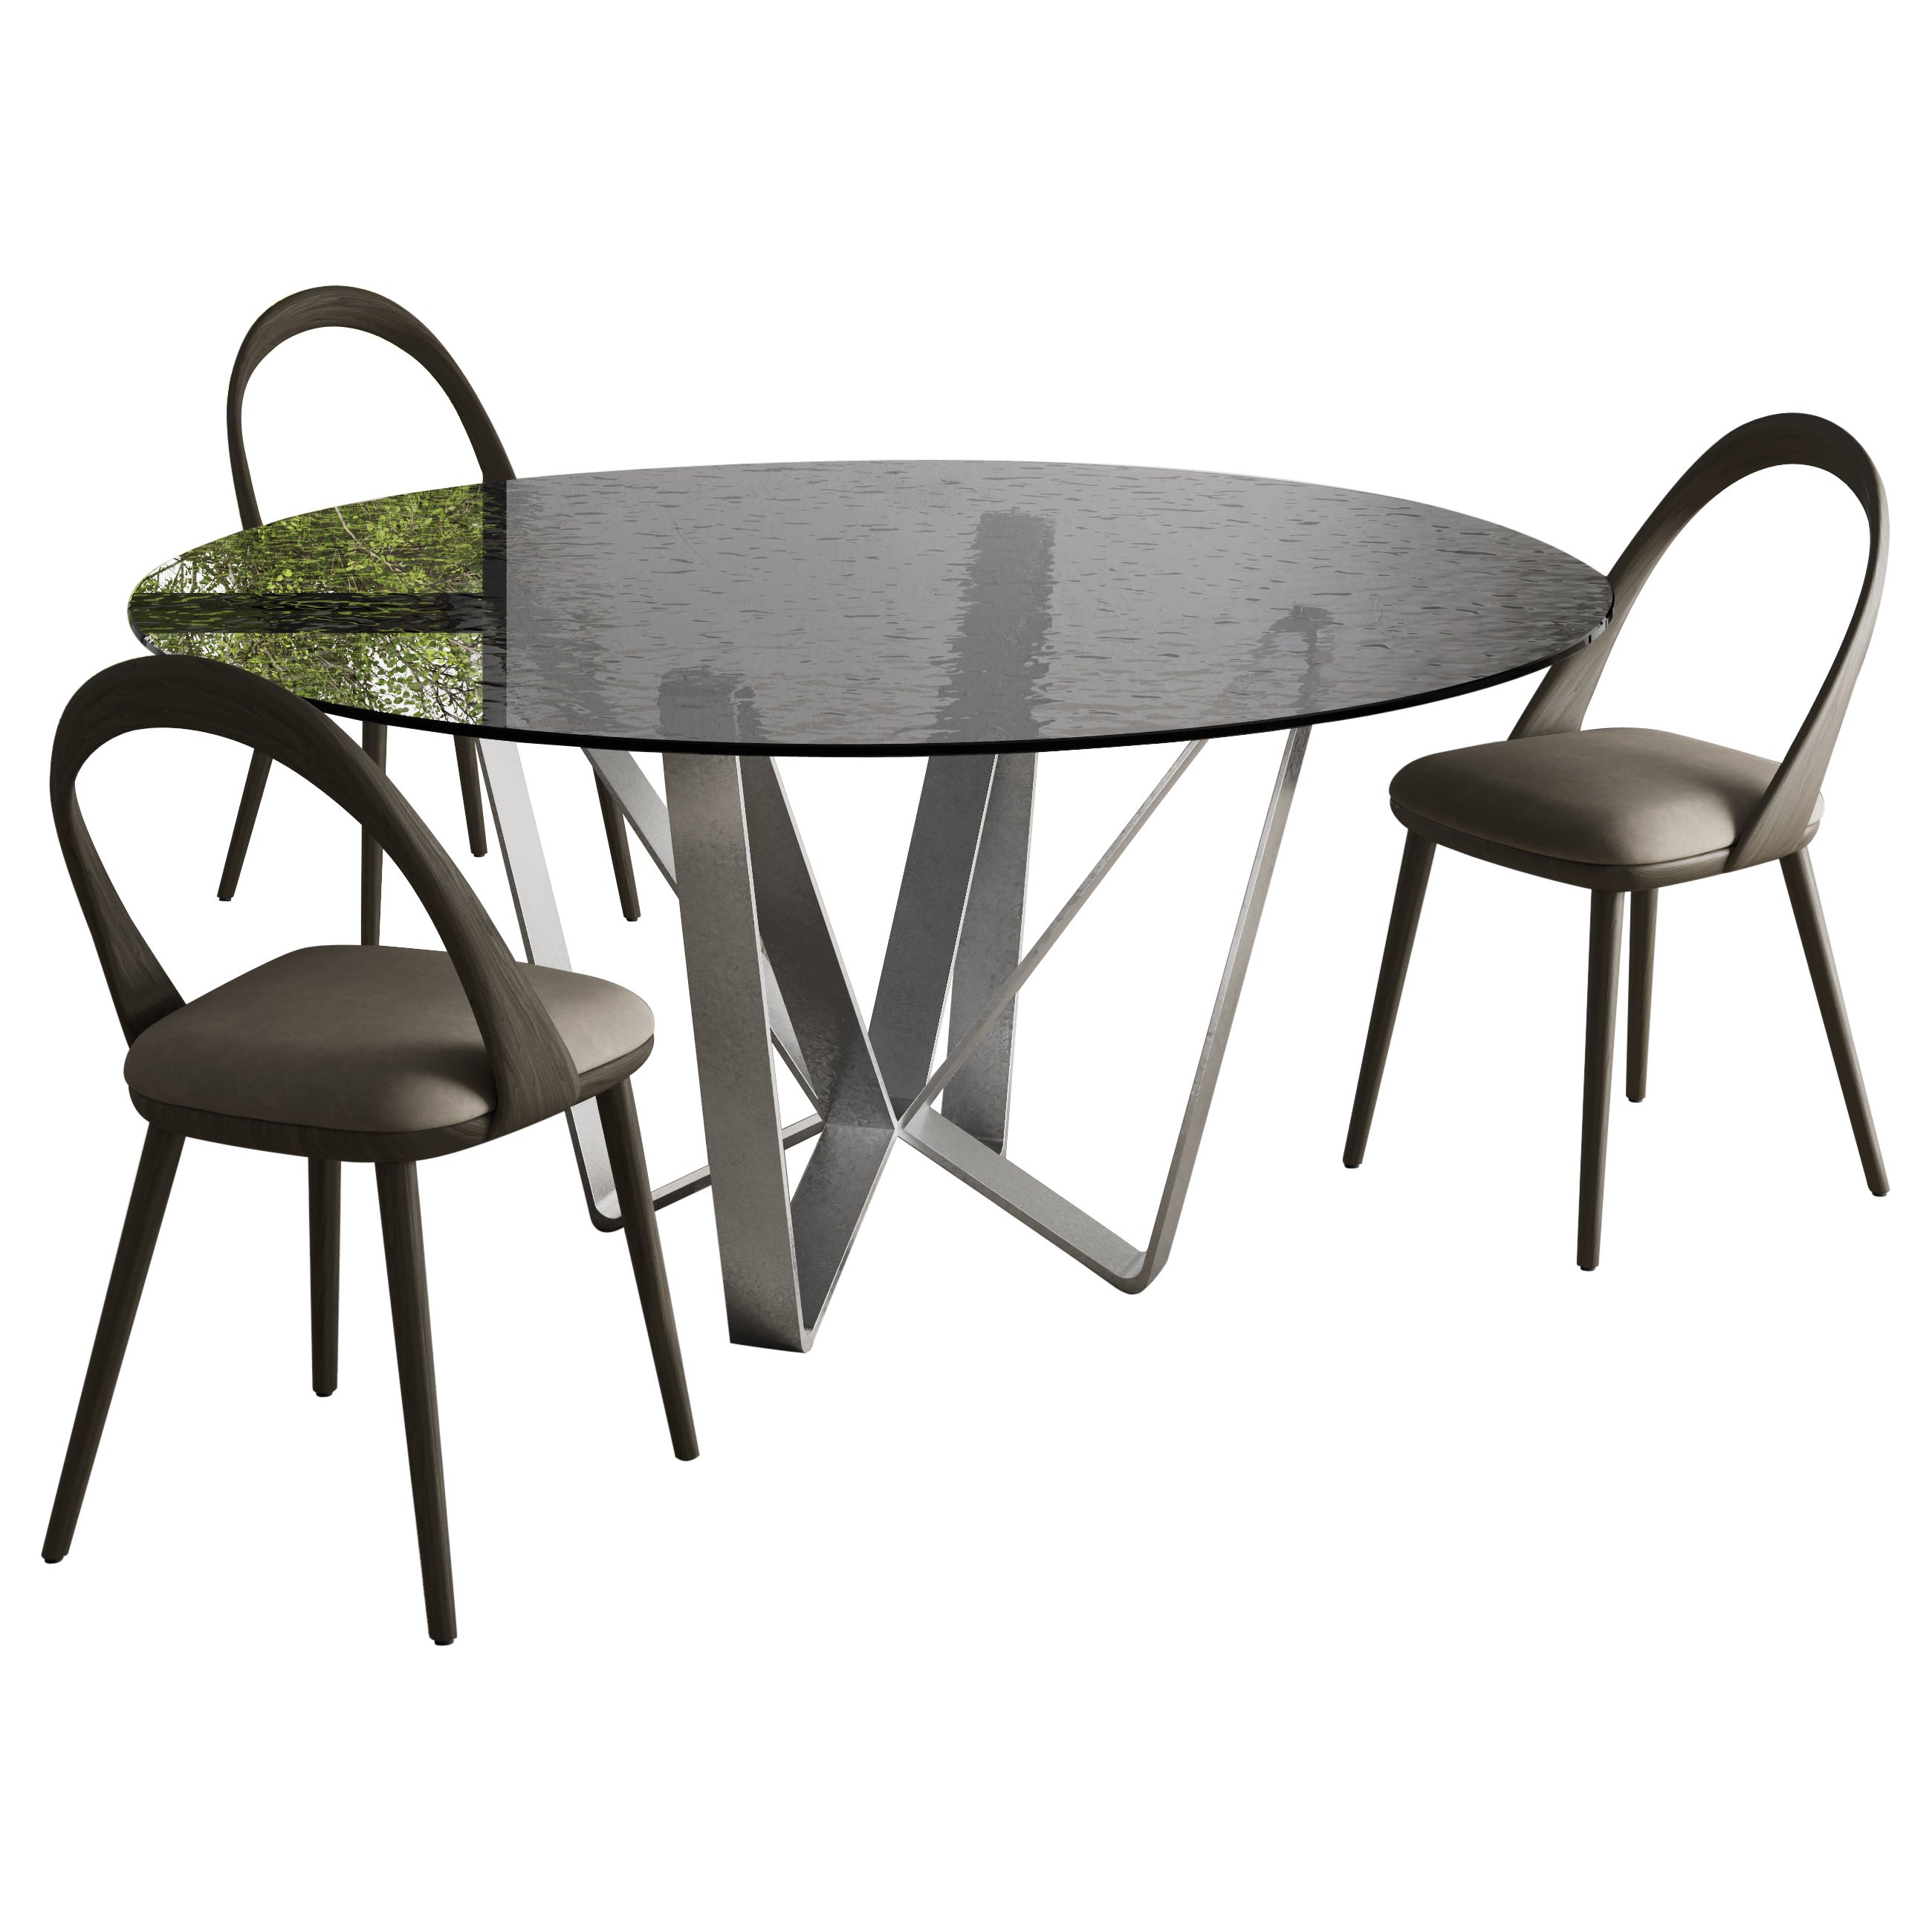 Zefiro Dining Table by Chinellato Design For Sale